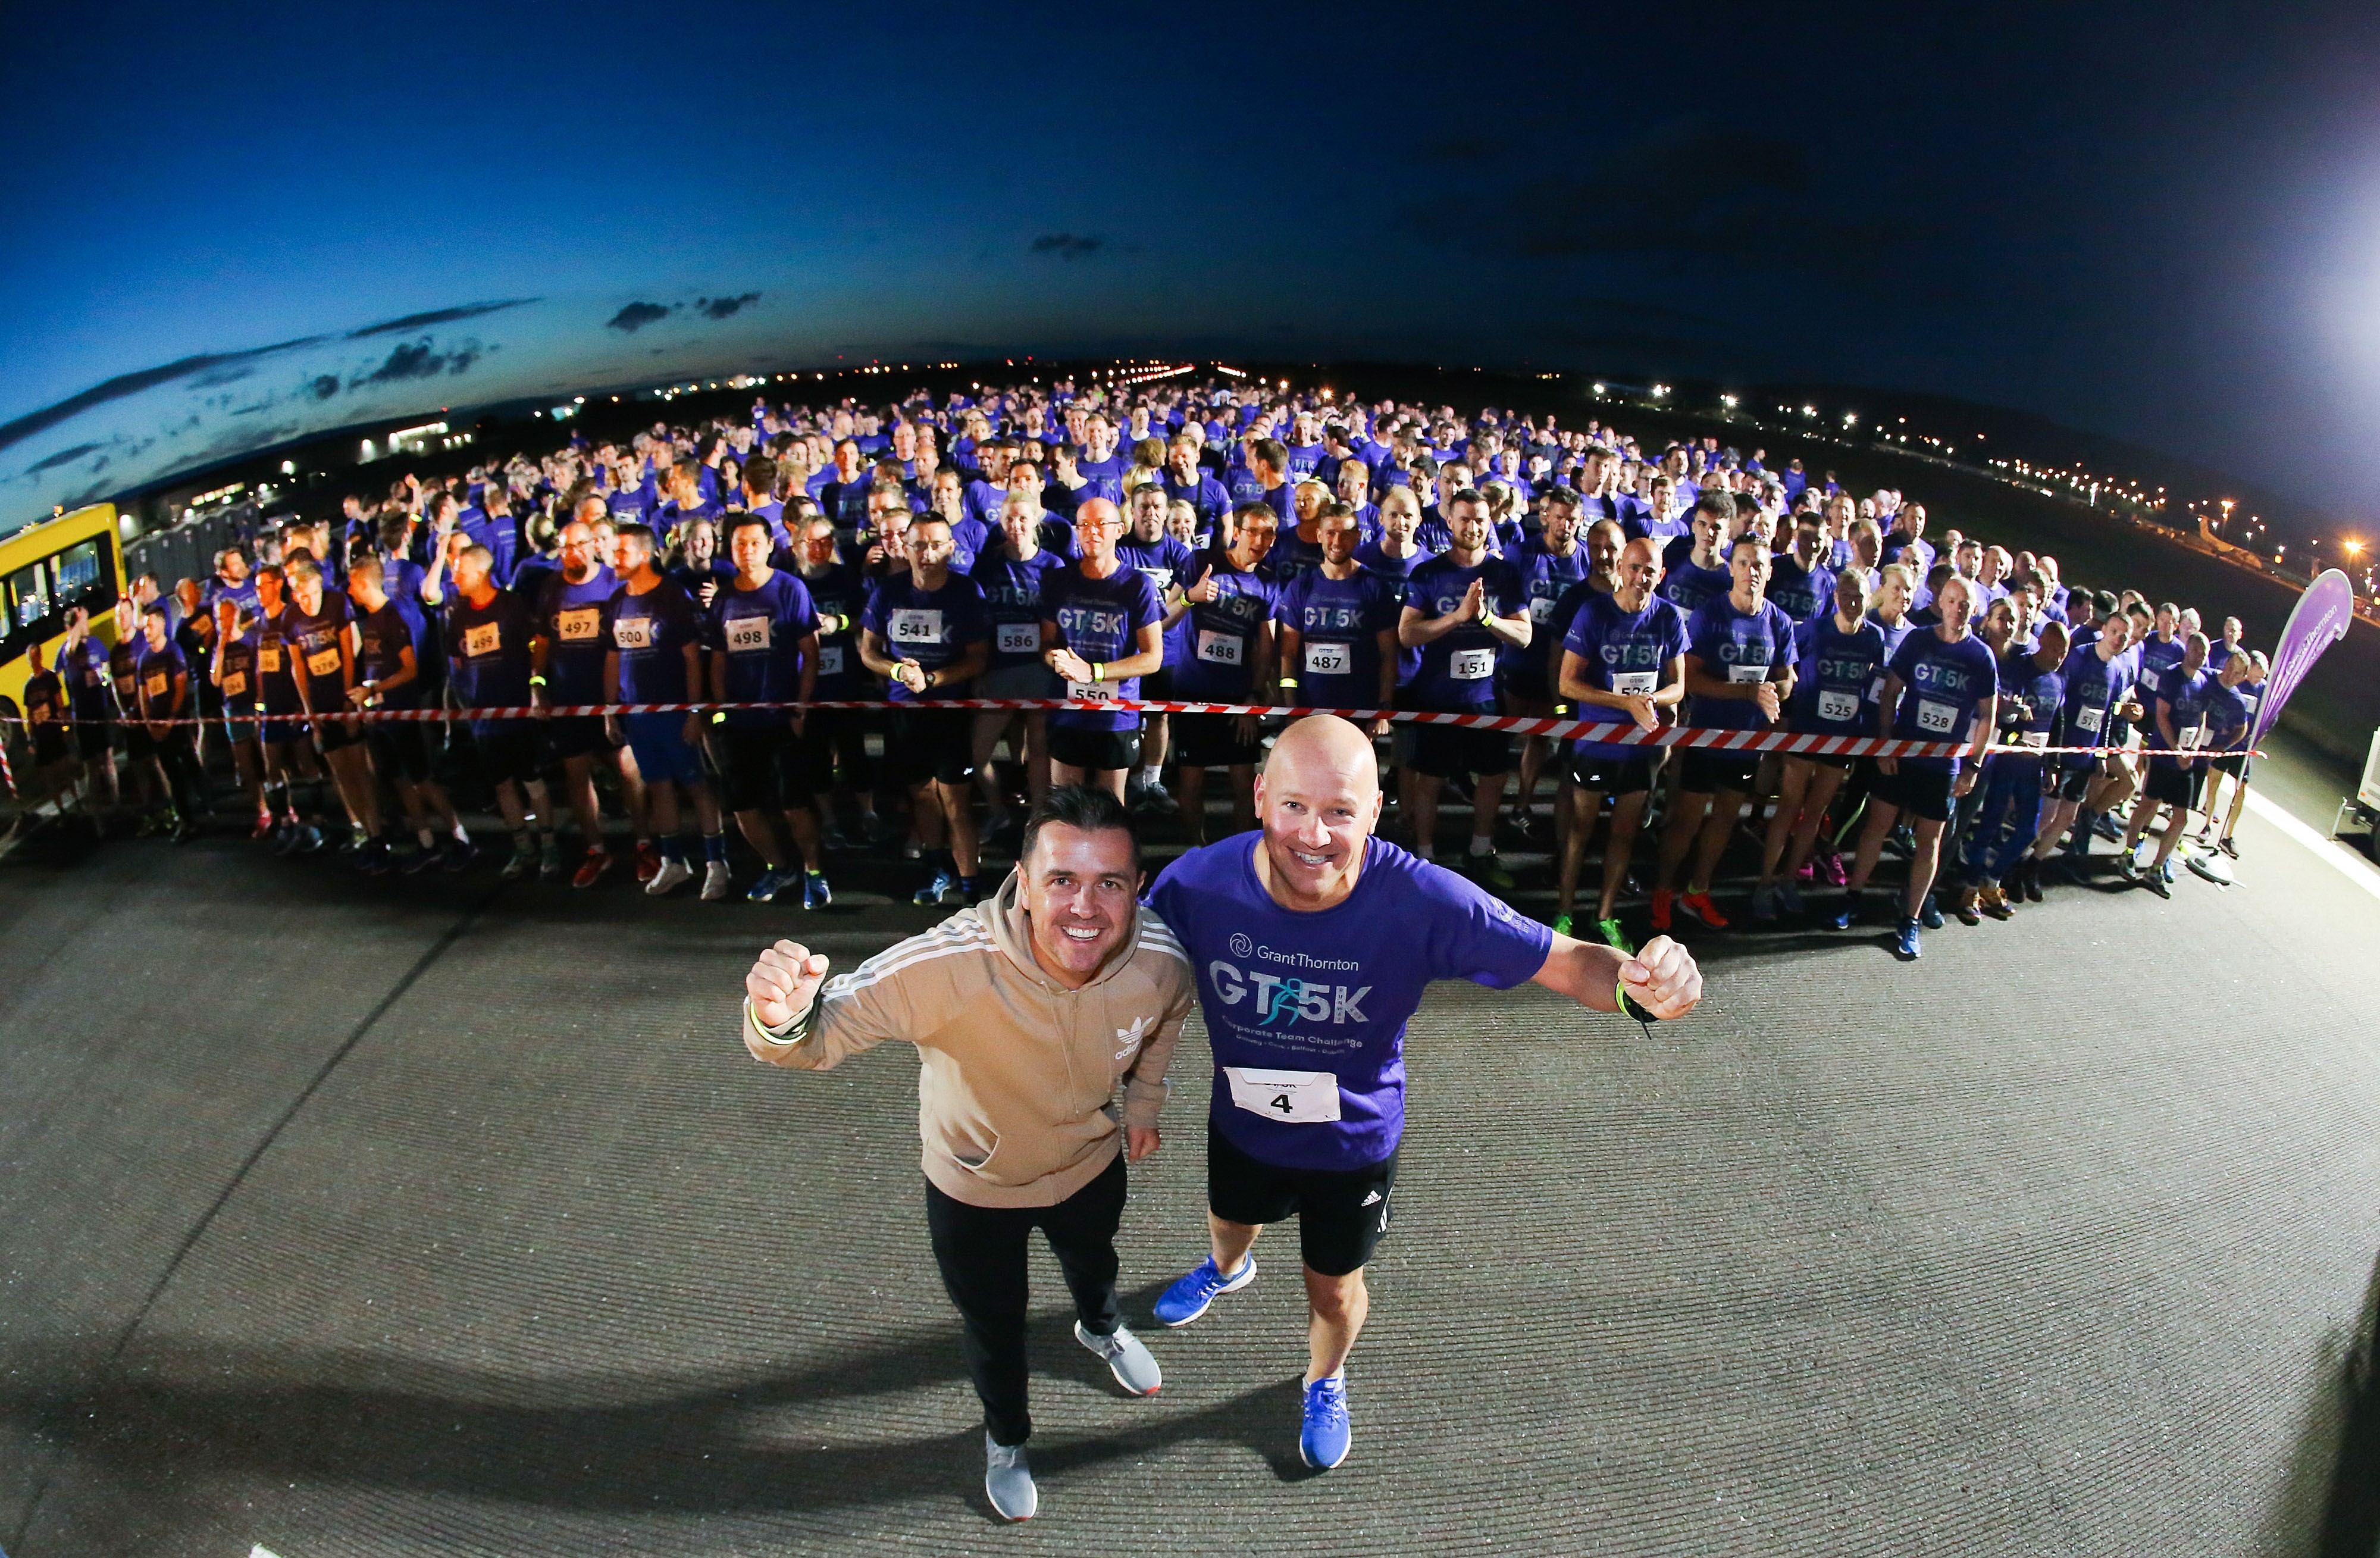 The Grant Thornton Runway Run, which took place last night (Thursday 21 June), was a ...